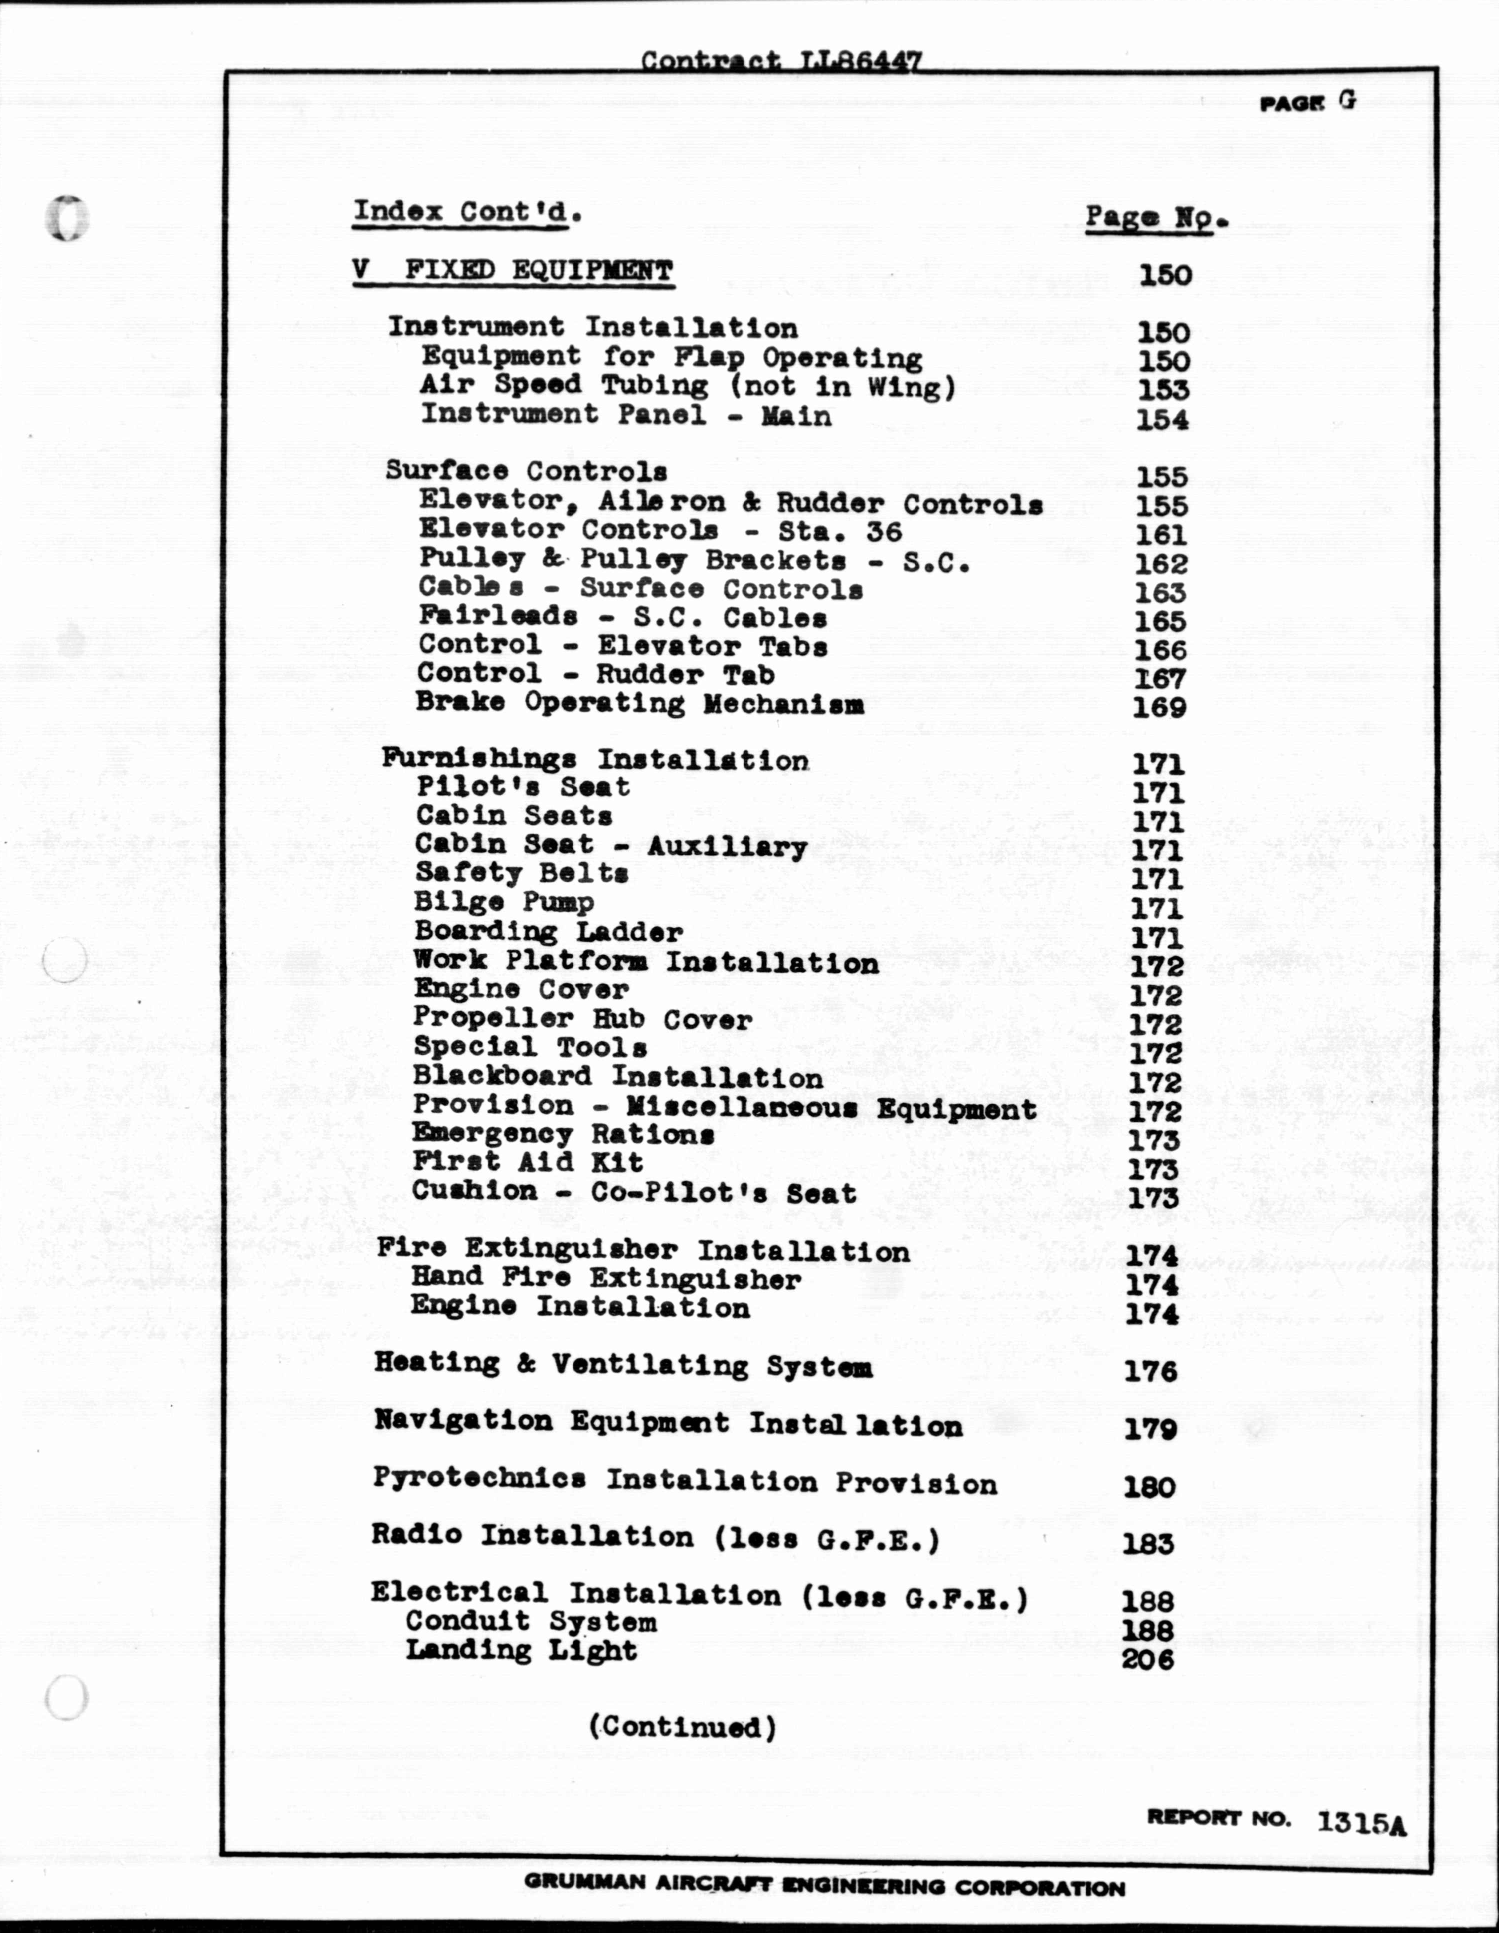 Sample page 7 from AirCorps Library document: JRF-6B Final Spare Parts List with Prices, Contract LL86-447 